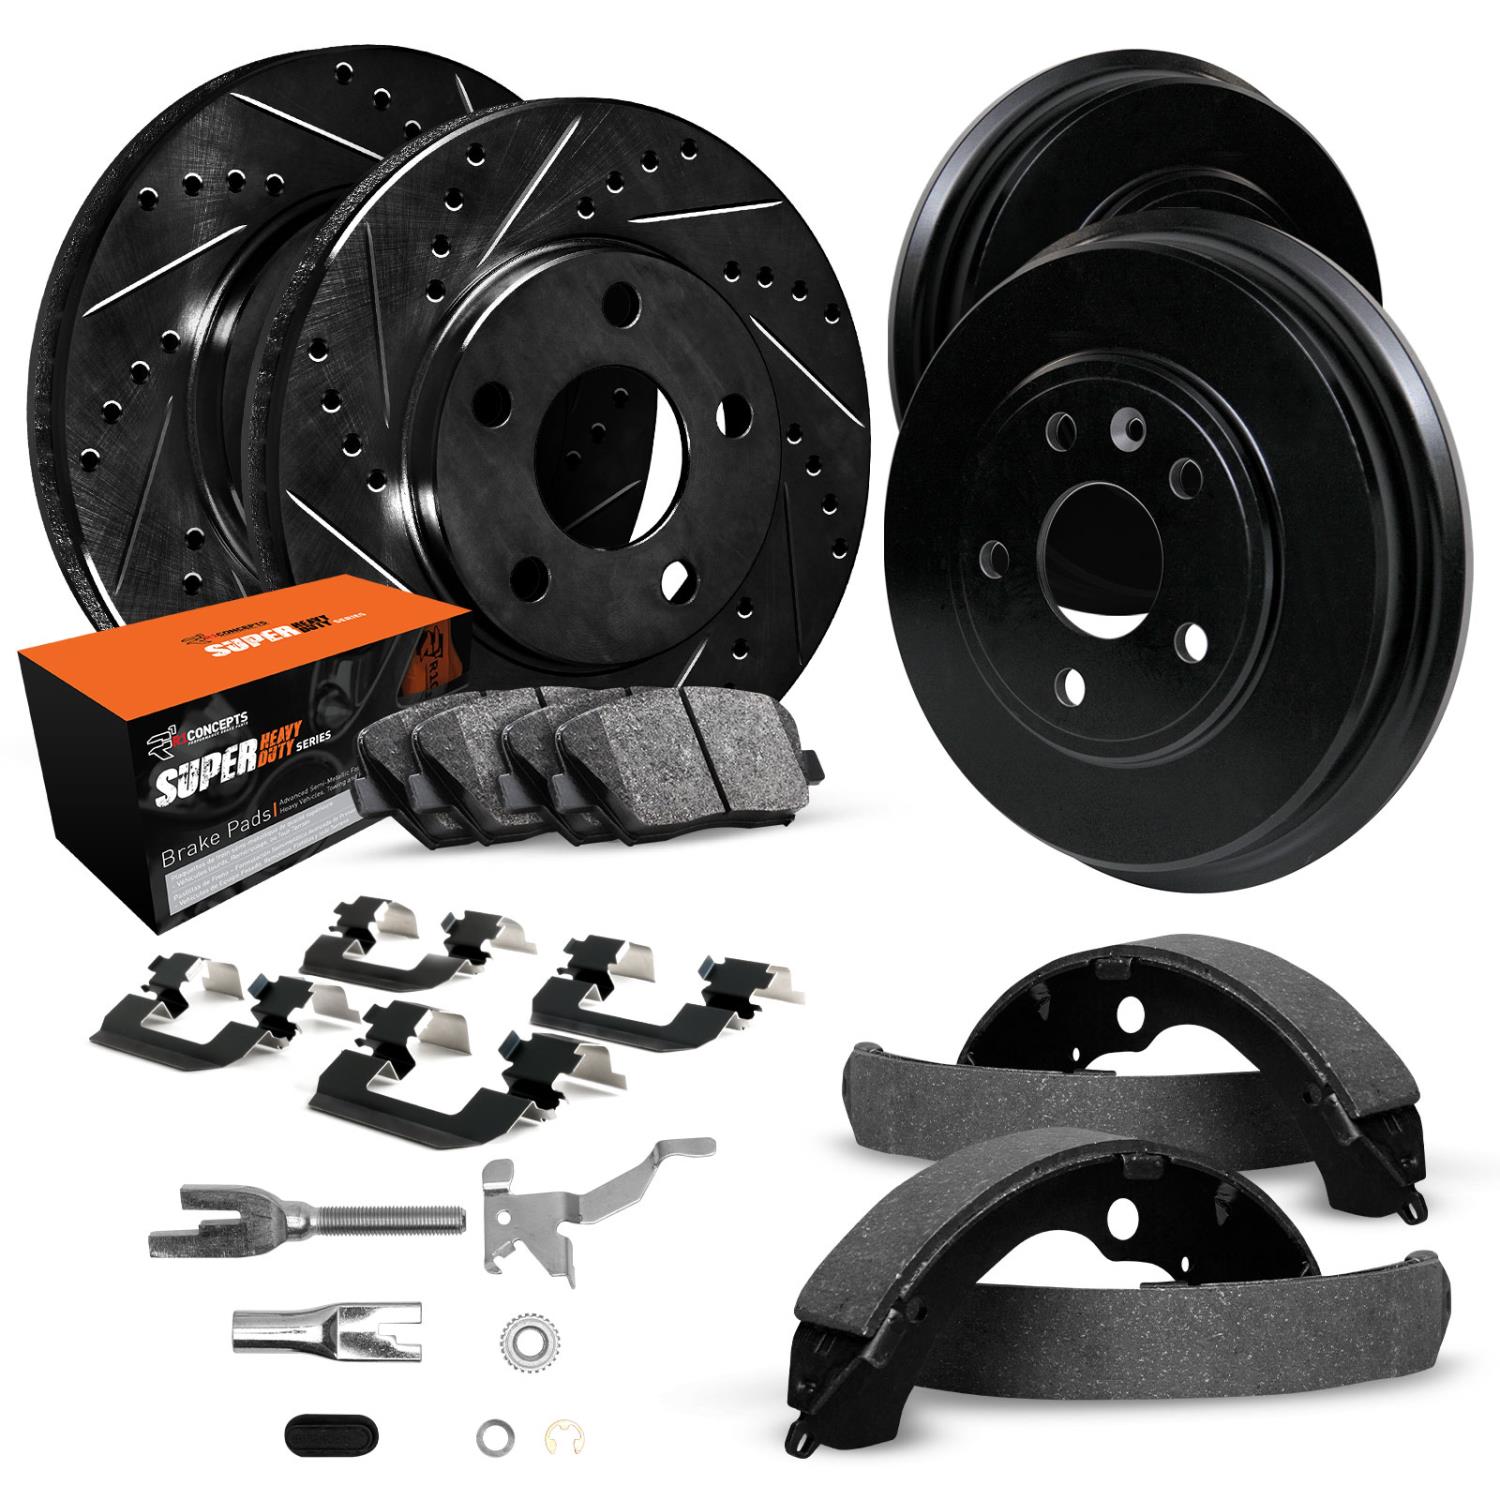 E-Line Drilled/Slotted Black Rotor & Drum Set w/Super-Duty Pads, Shoes, Hardware/Adjusters, 1975-1996 GM